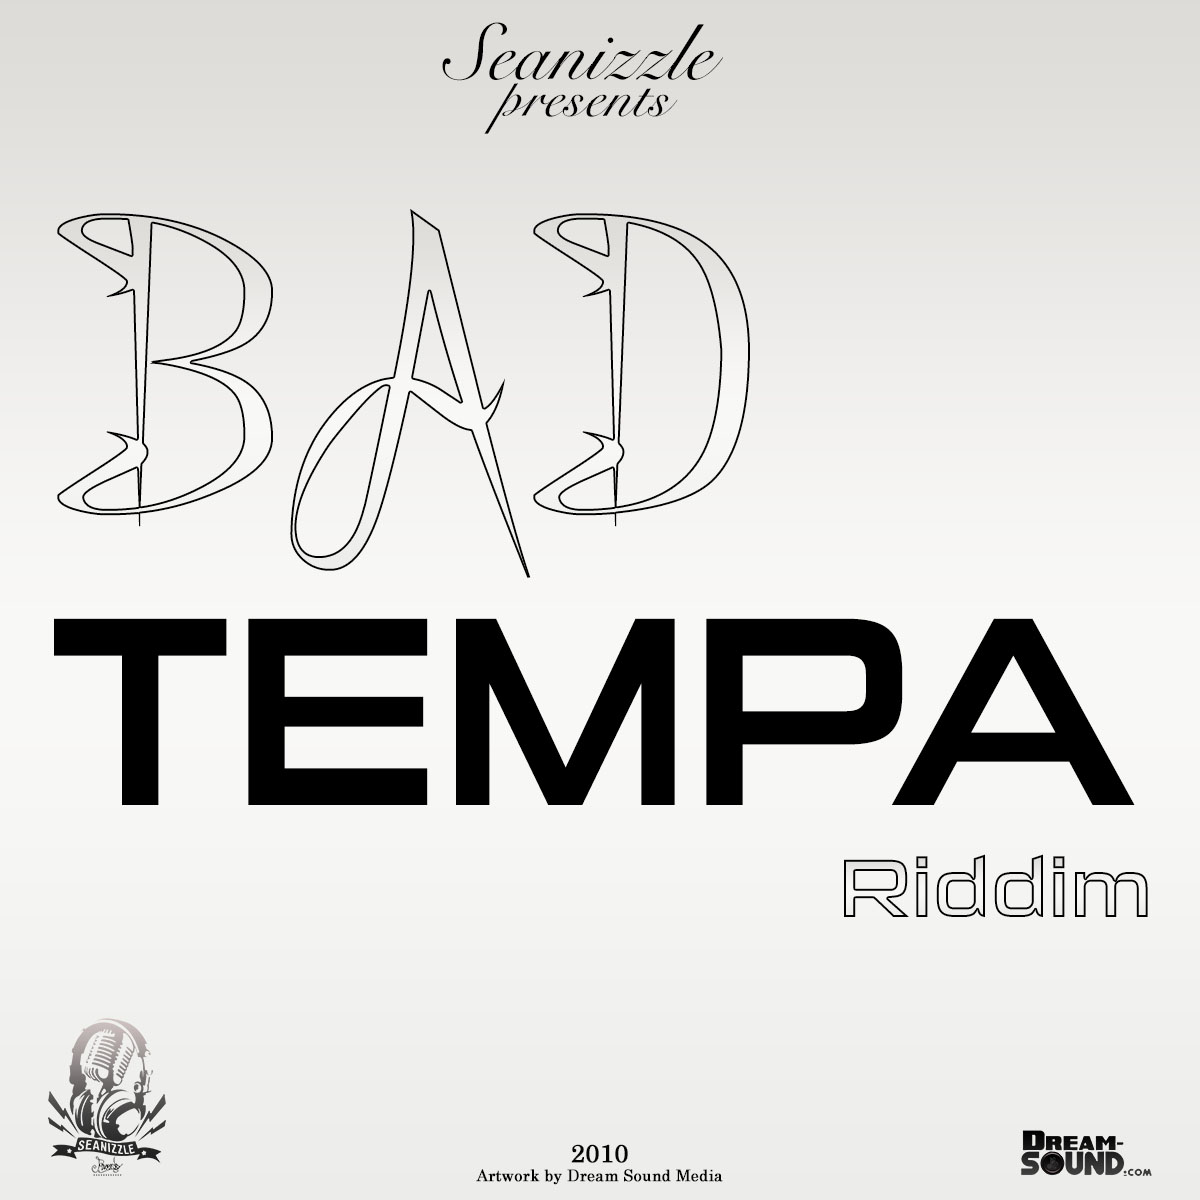 Flashback to 2010 with the fire Bad Tempa Riddim by Seanizzle Music!

Big up @TwinofTwins for their track on this riddim!

#BadTempaRiddim #DSM973Riddim #DSM973ReUp #DSM973Throwback

dream-sound.com/bad-tempa-ridd…